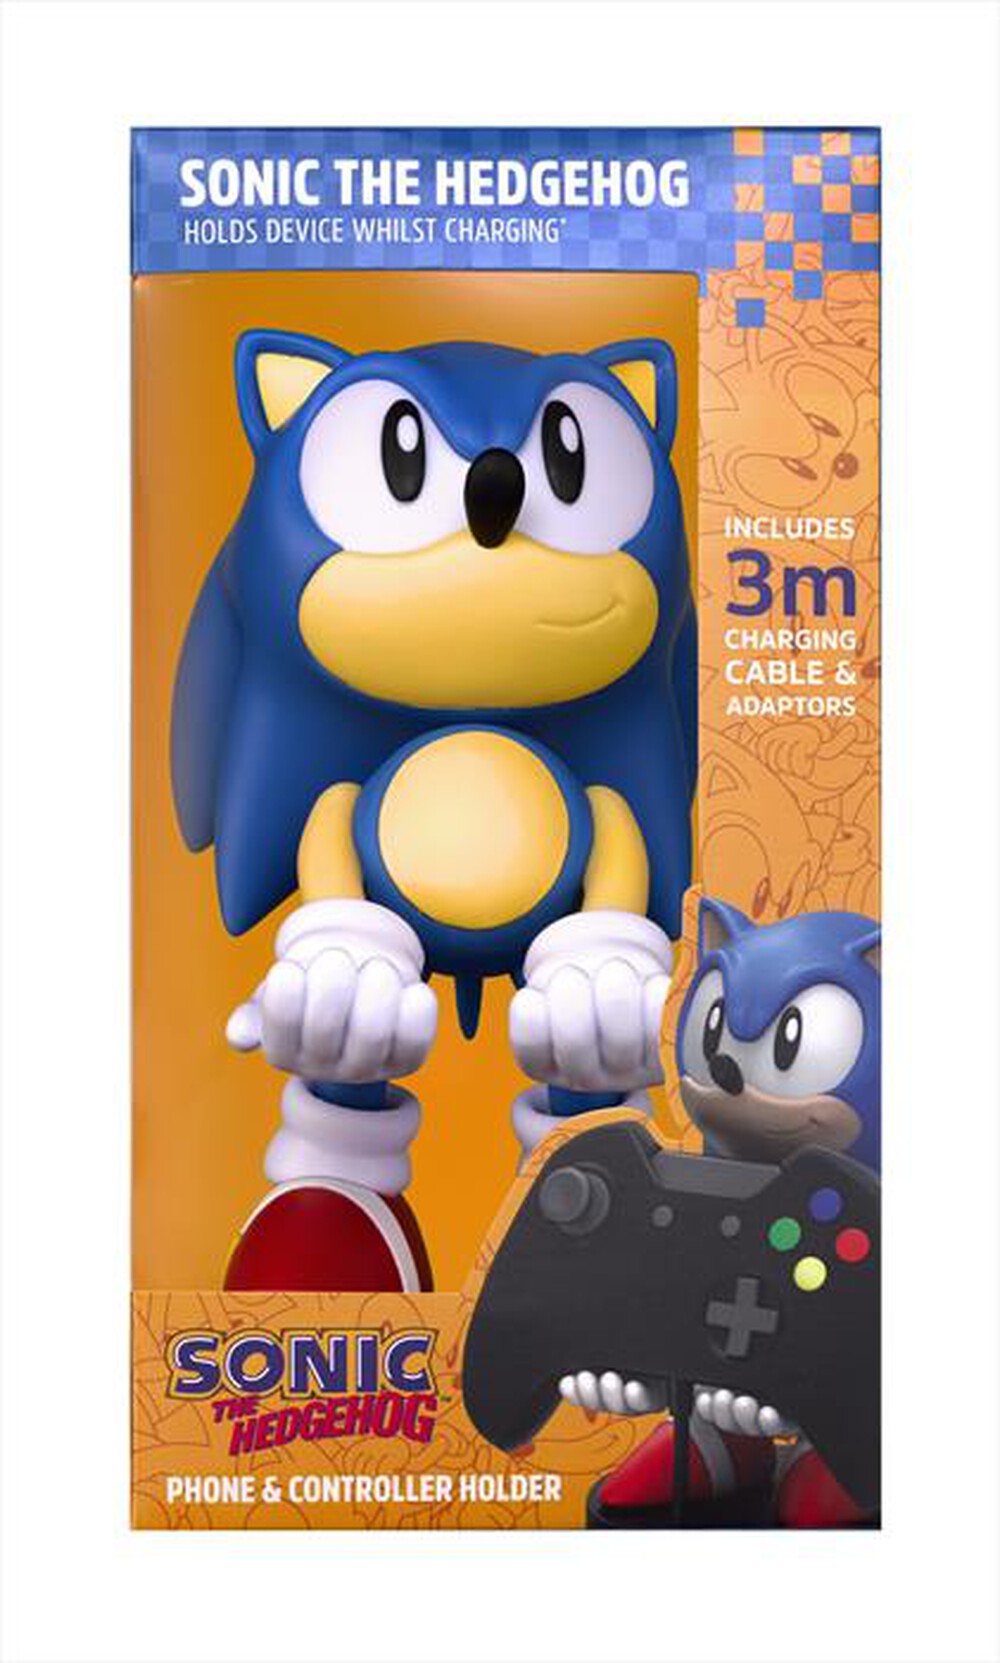 "EXQUISITE GAMING - CLASSIC SONIC CABLE GUY"